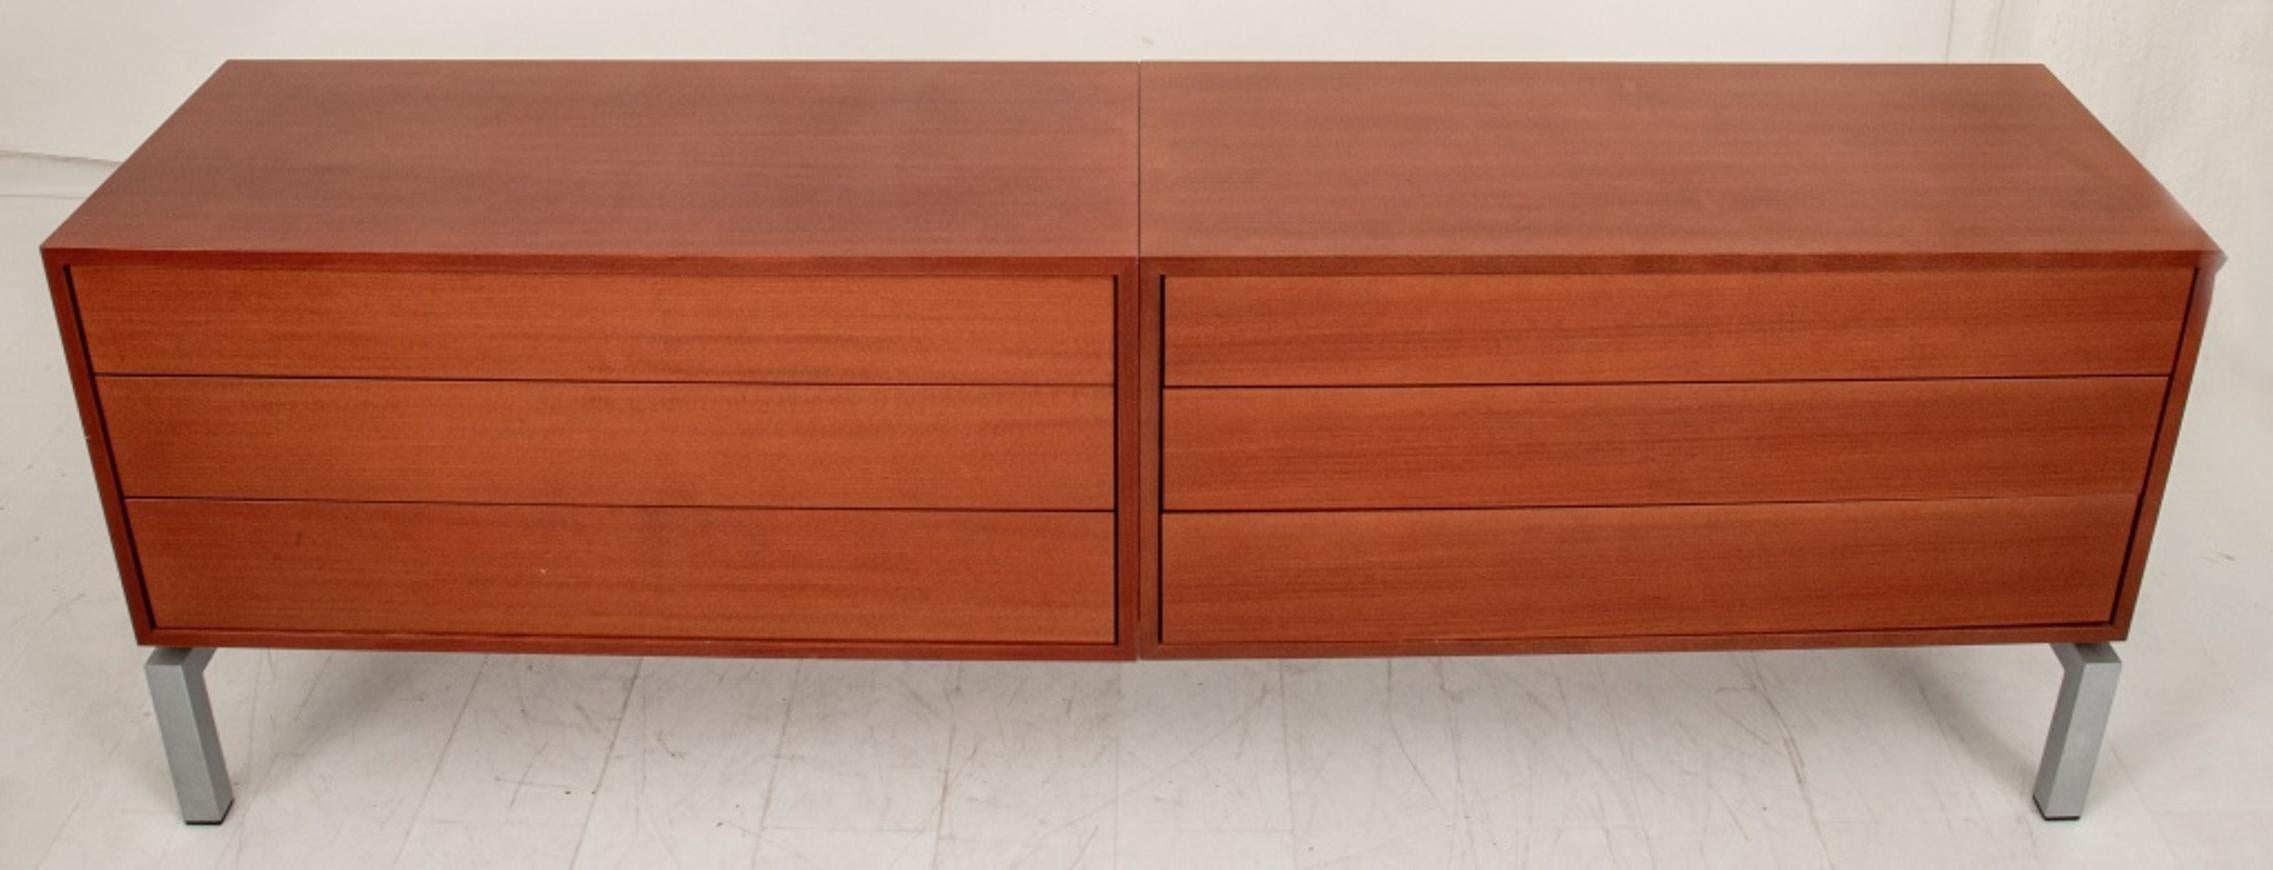 Hannes Wettstein (Swiss, 1958-2008) for Cassina, 1990s, Xen Console Dresser L 15, 1990s.  in beechwood stained cherrywood on a coated steel base. 

Dimensions: 26.75